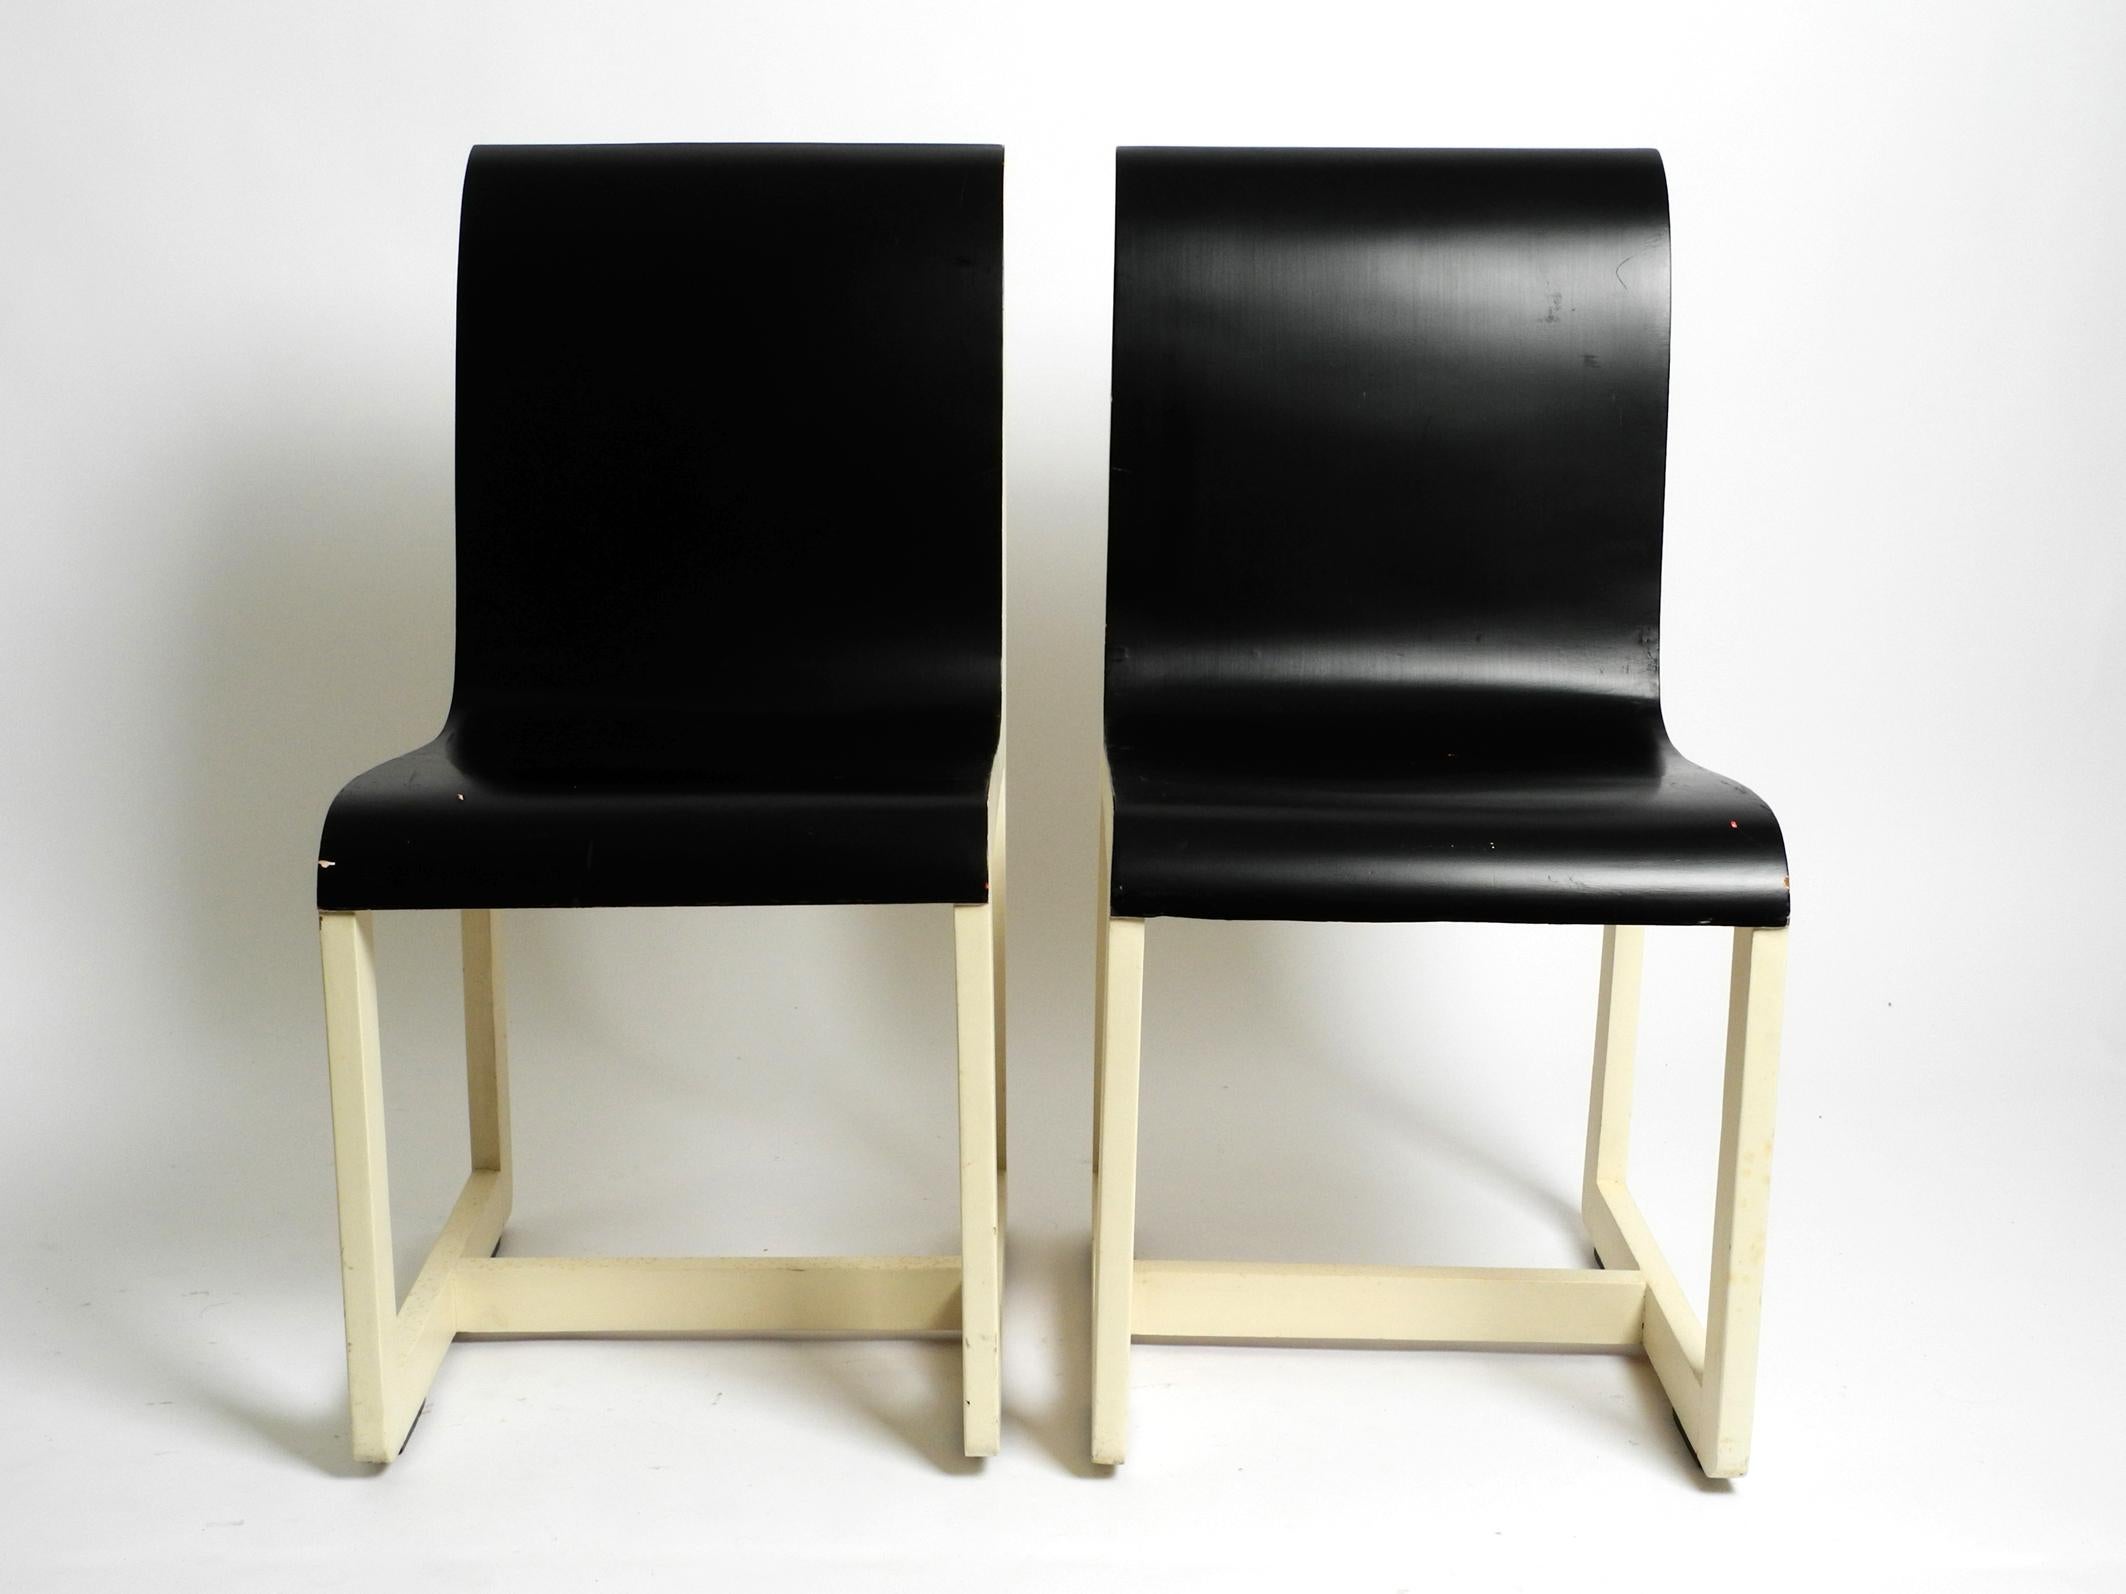 German Two original 1930s wooden chairs by the well-known Bauhaus student Peter Keler For Sale